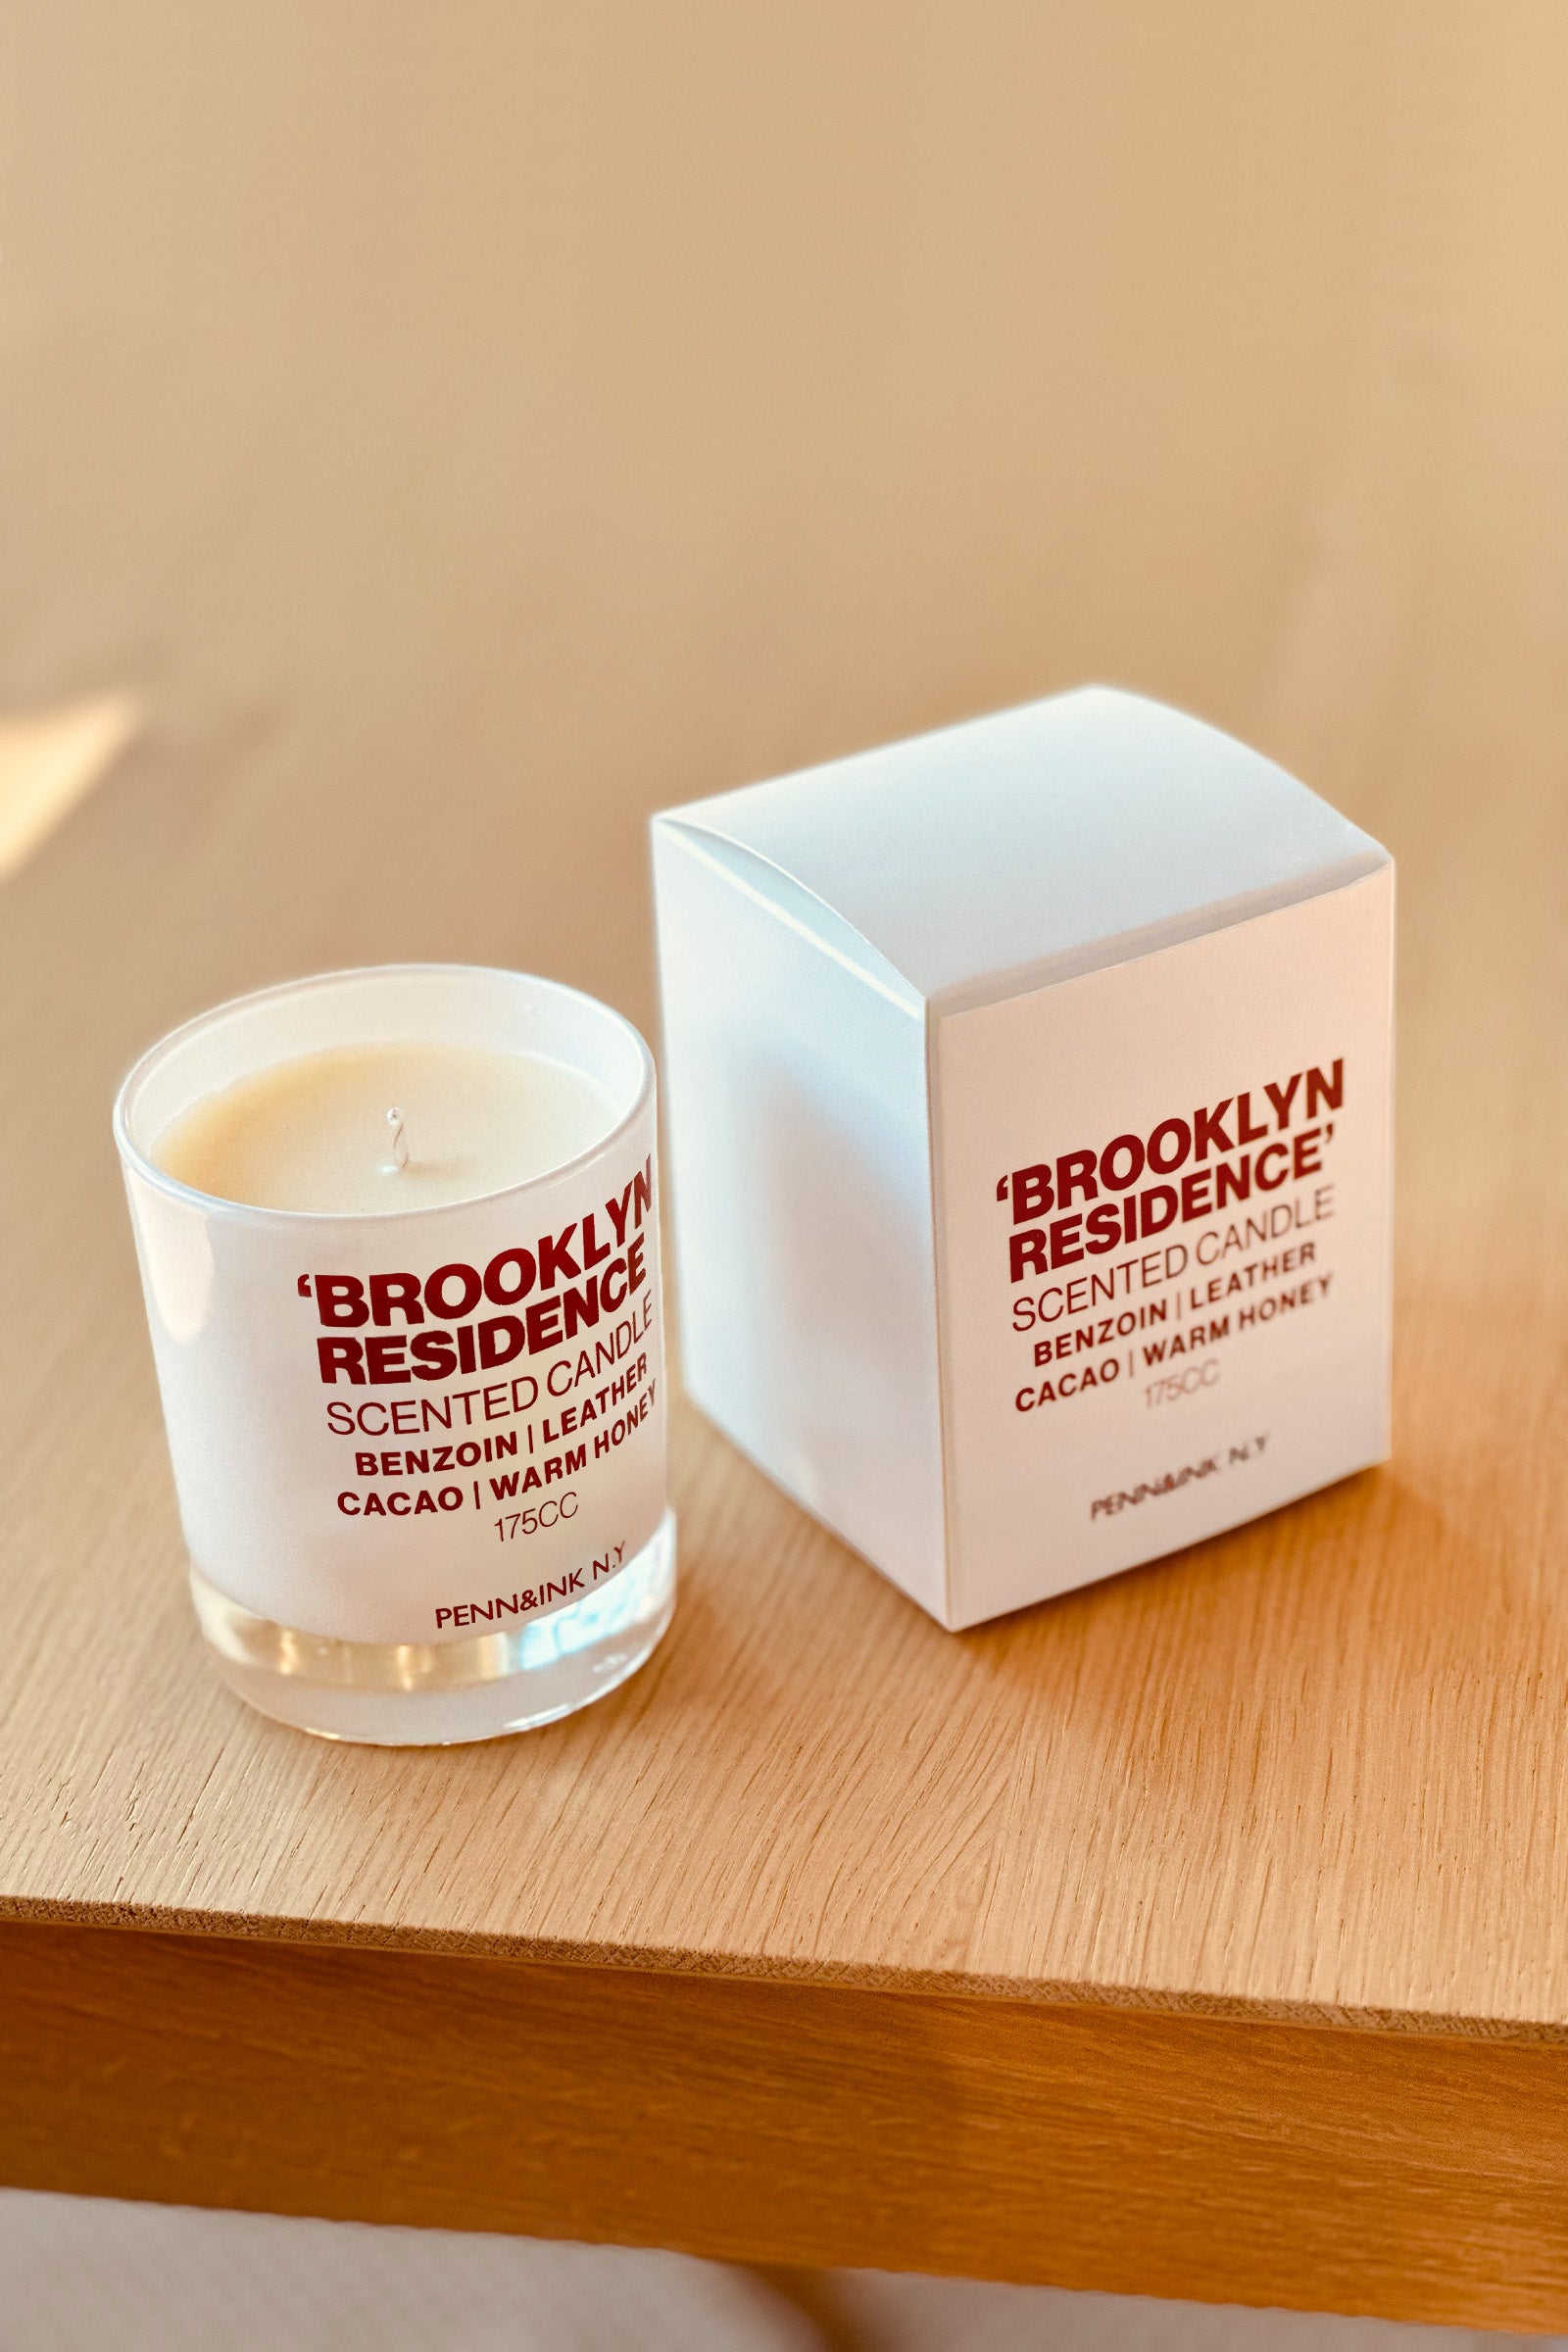 BROOKLYN RESIDENCE - SCENTED CANDLE